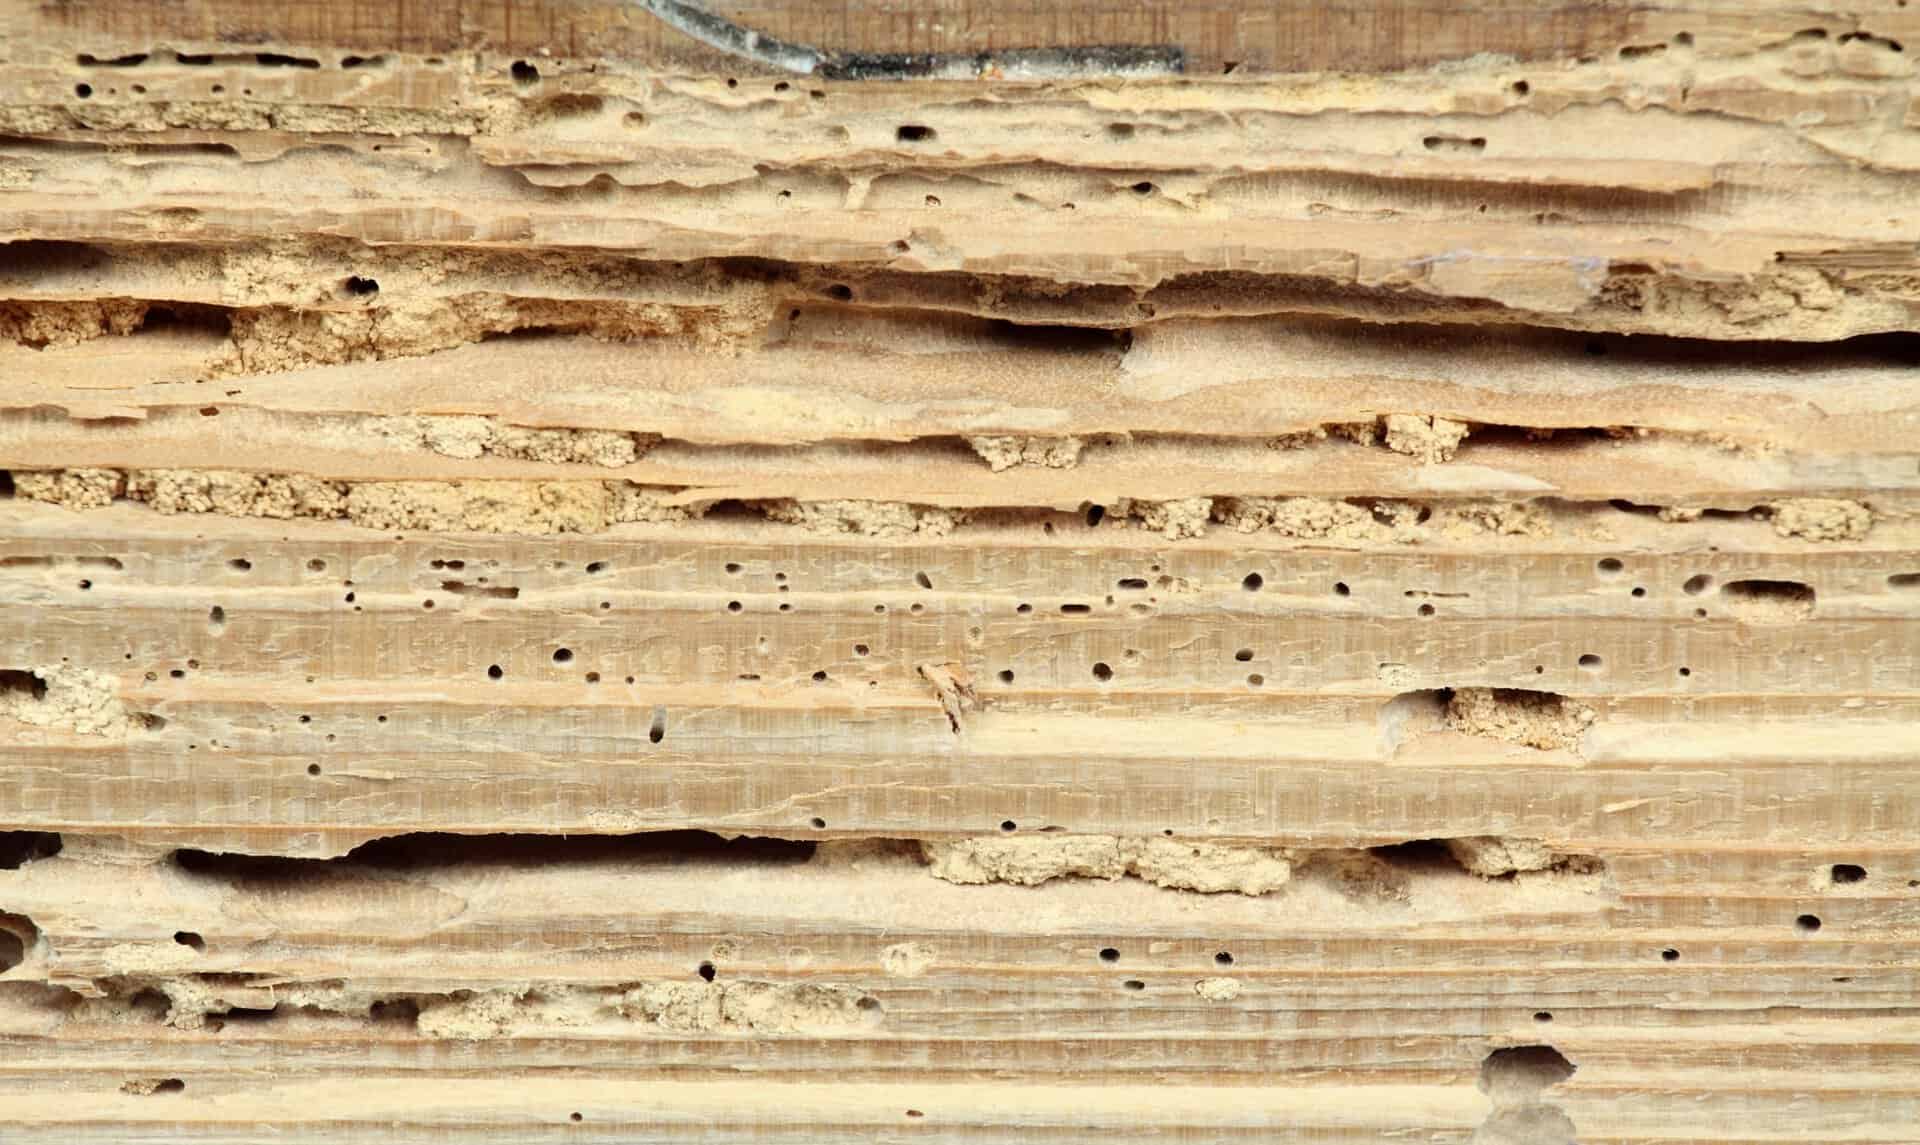 Who is good at treating termites West Palm Beach?